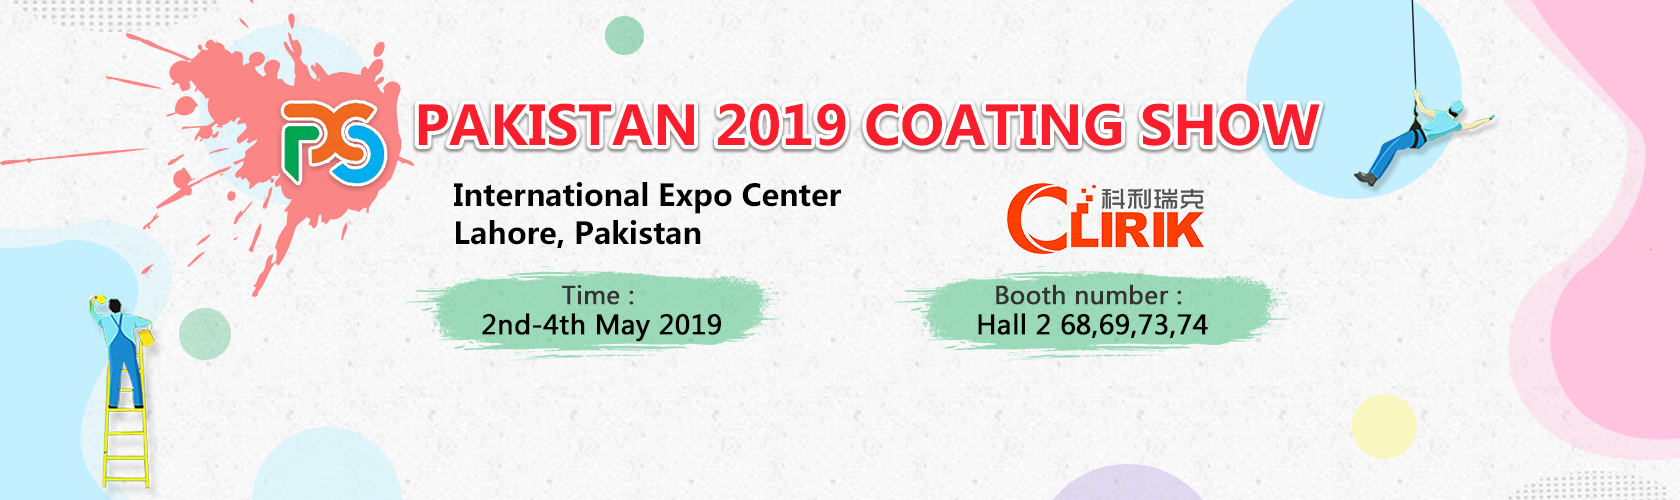 Pakistan 2019 Coating Show, We are Coming 